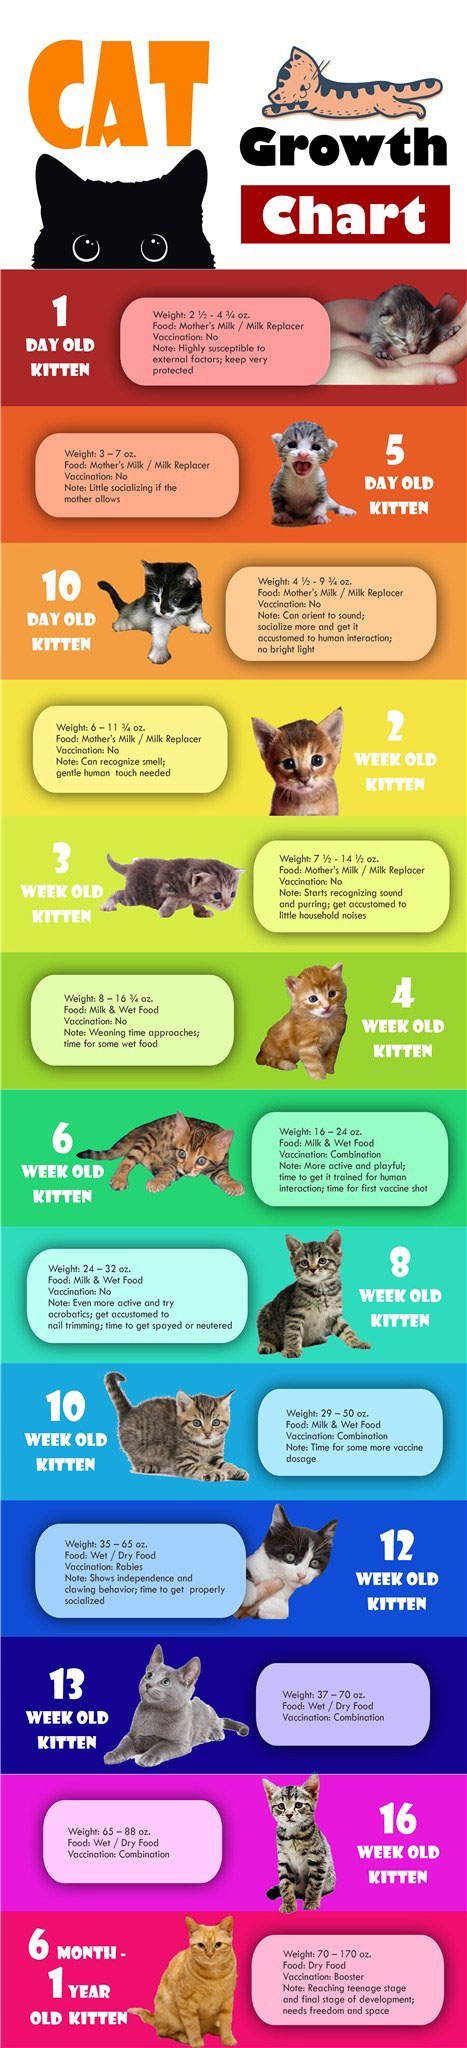 Cat Growth Chart [infographic] Best Infographics